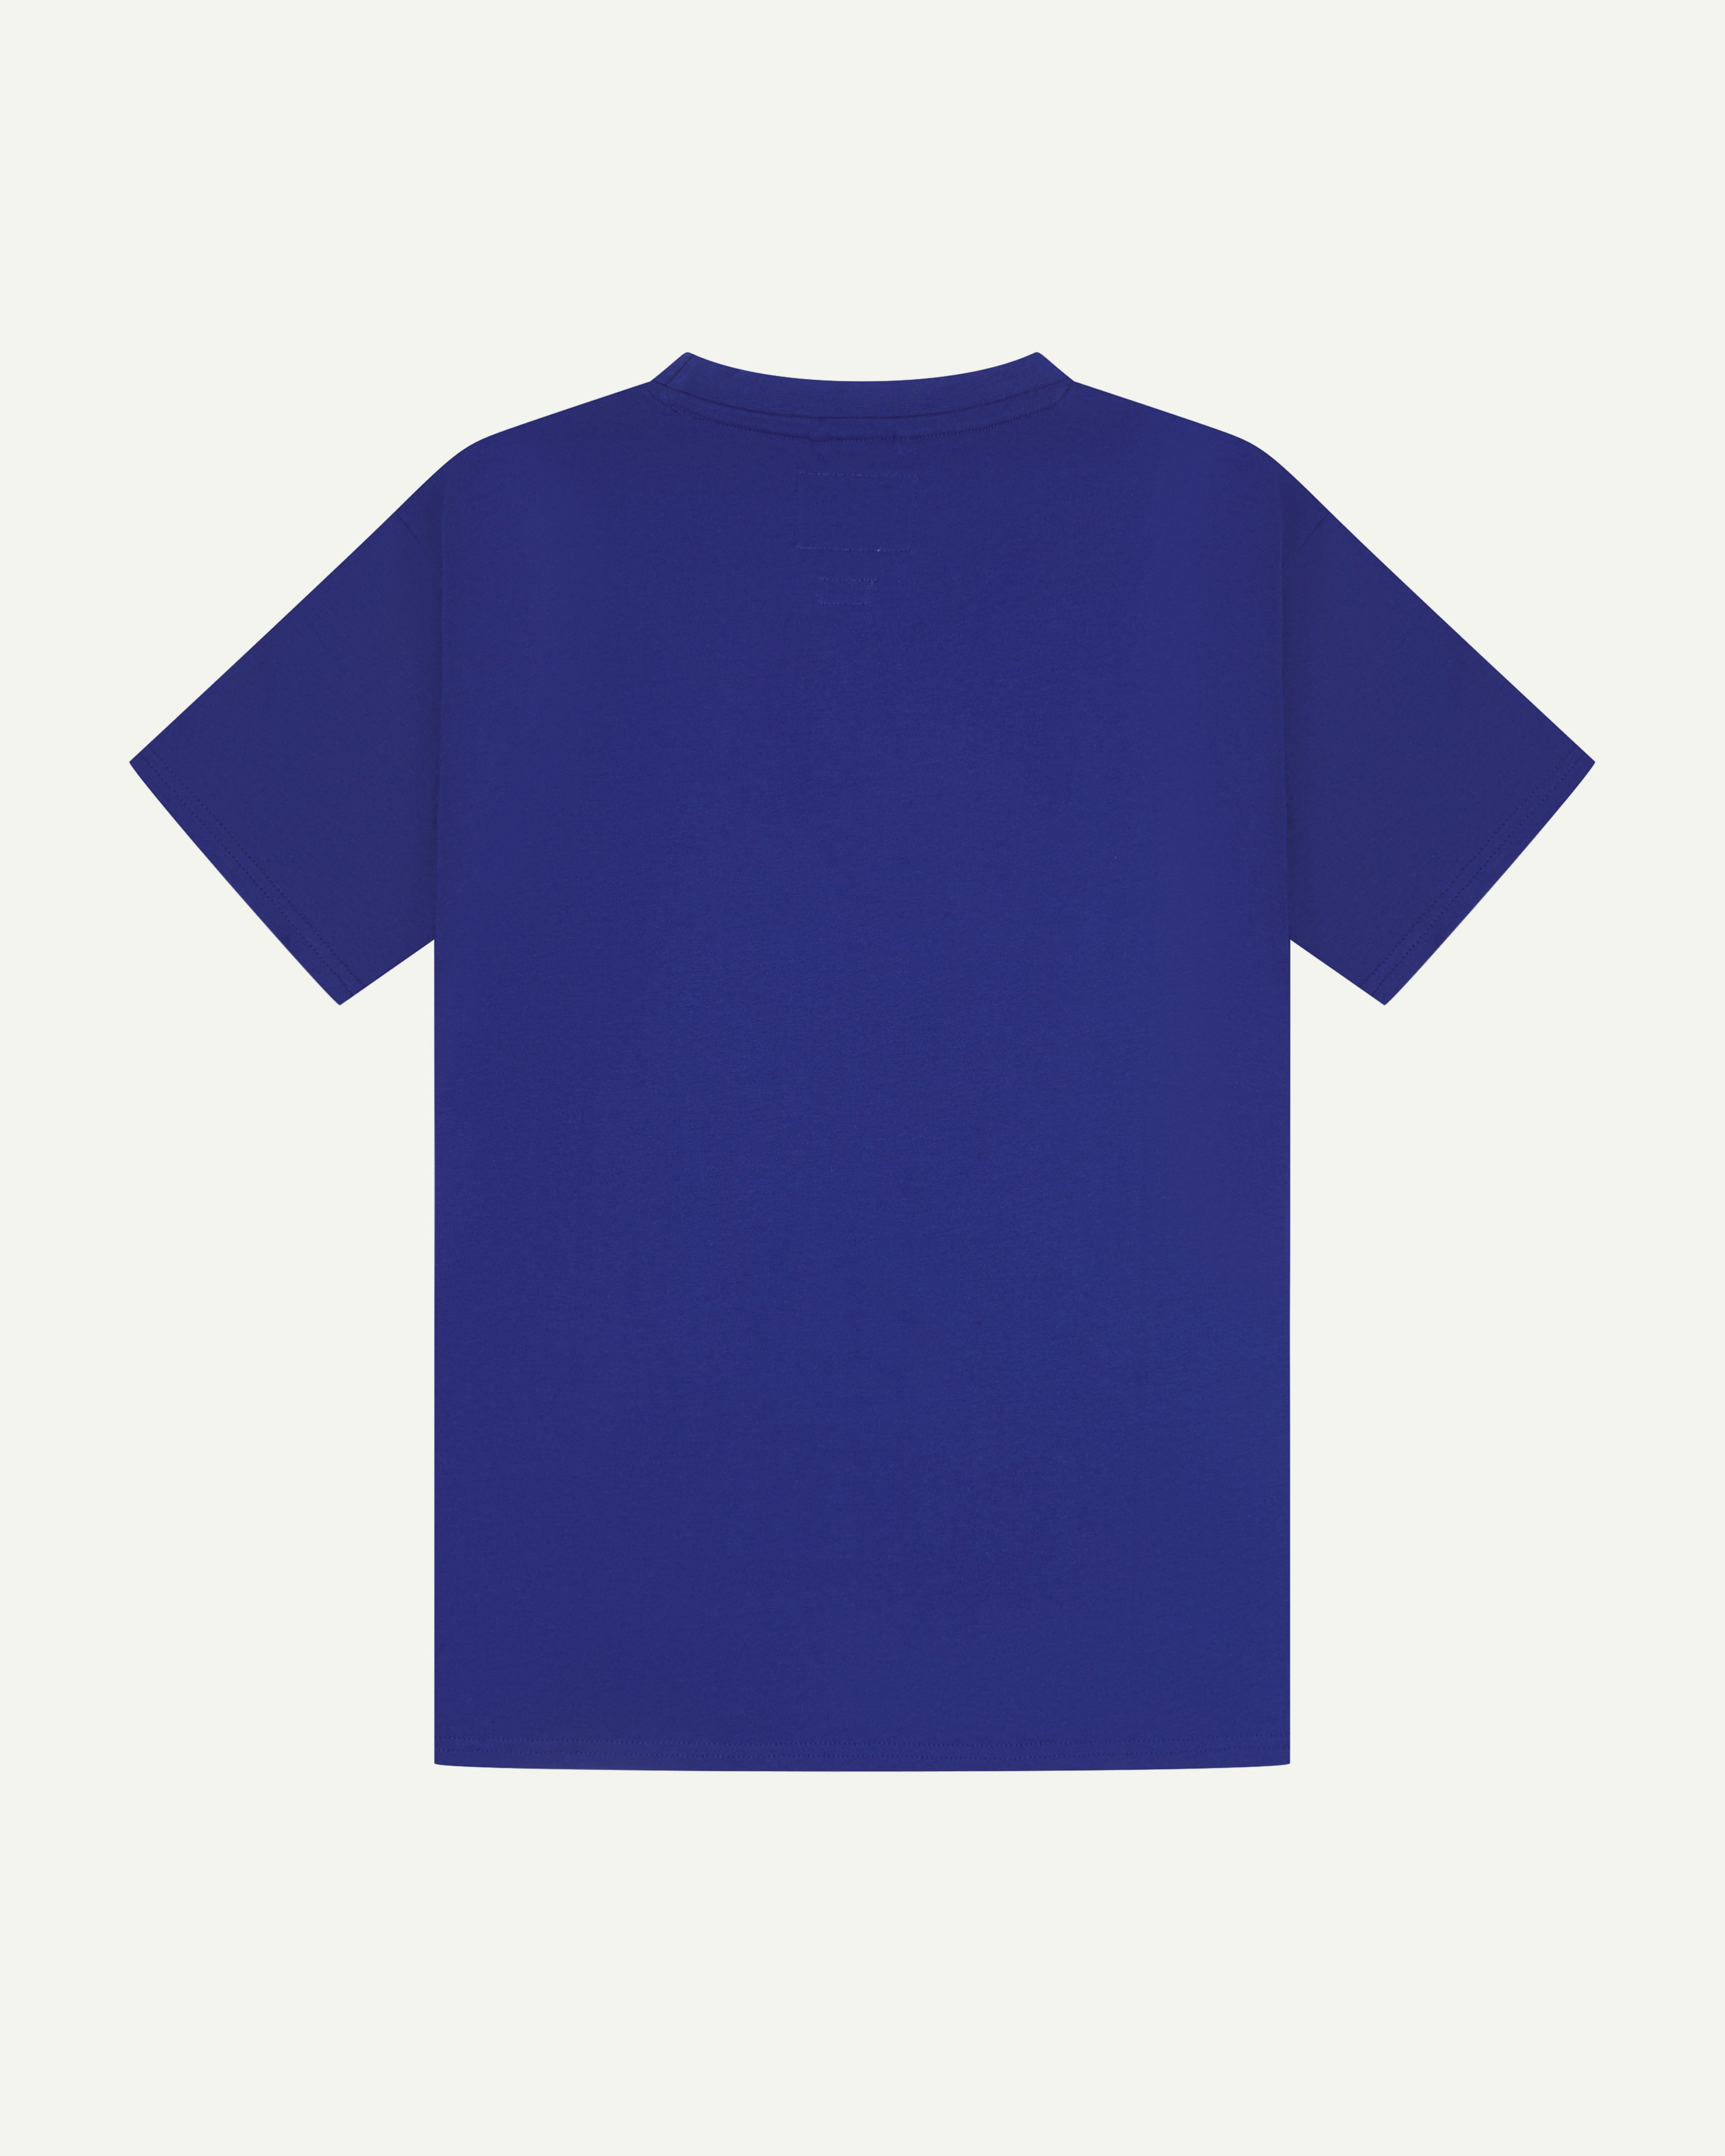 Back view of uskees #7006 men's short sleeve Tee in bright blue